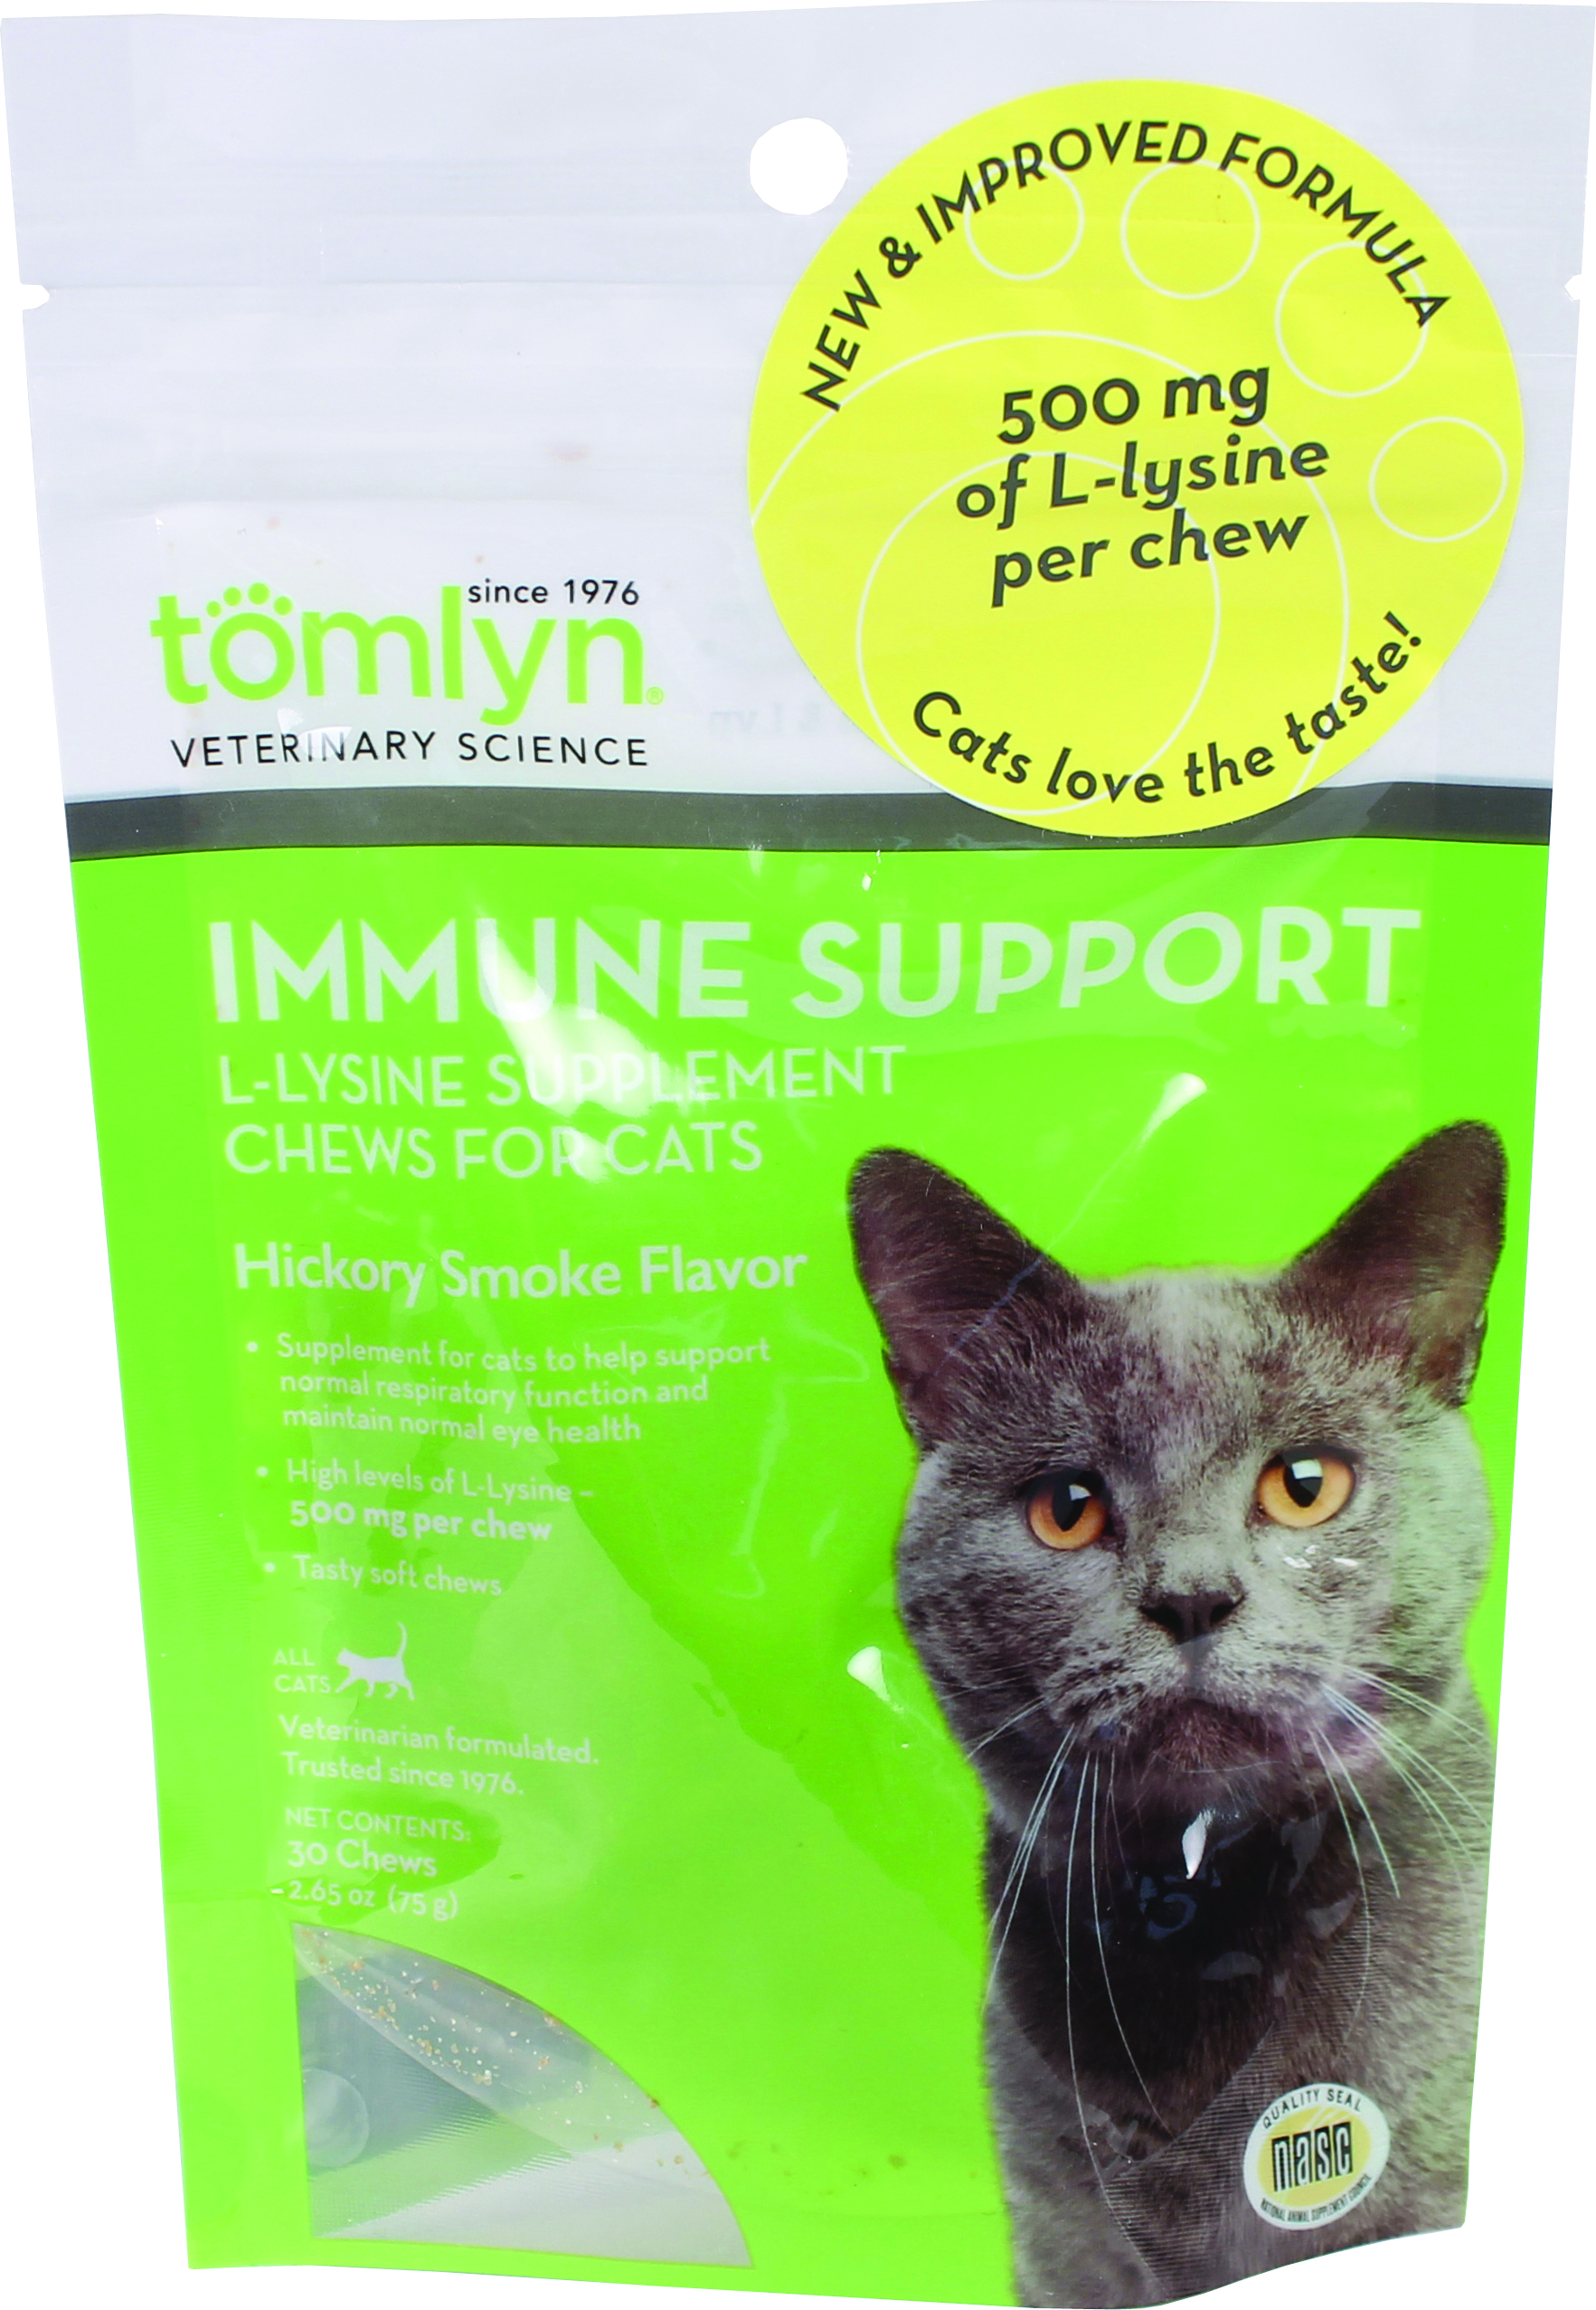 IMMUNE SUPPORT L-LYSINE SUPPLEMENT CHEWS FOR CATS